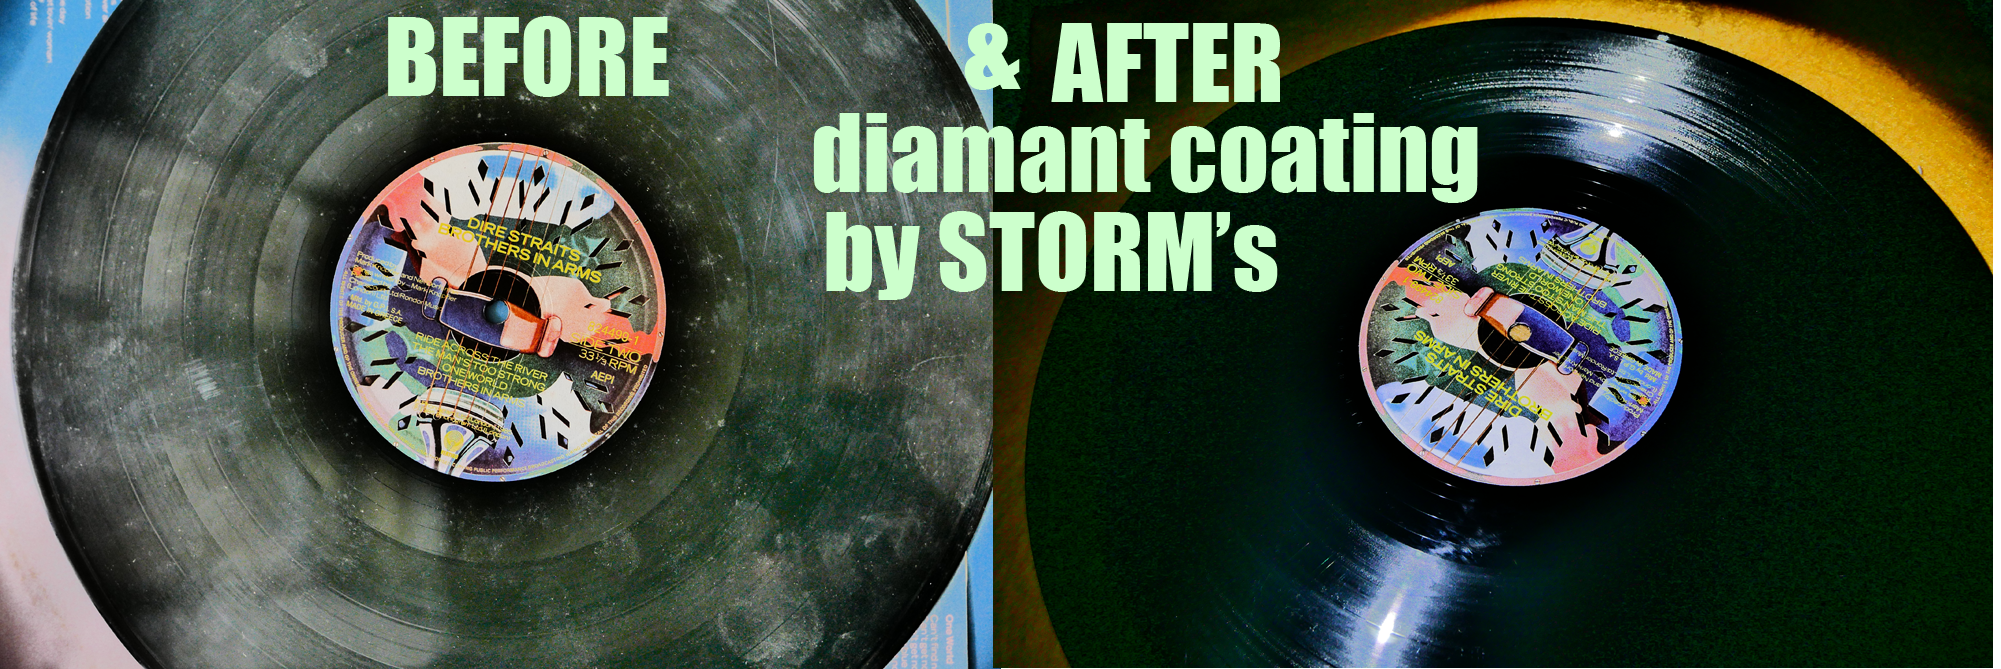 diamant coating on vinyl LP before and after